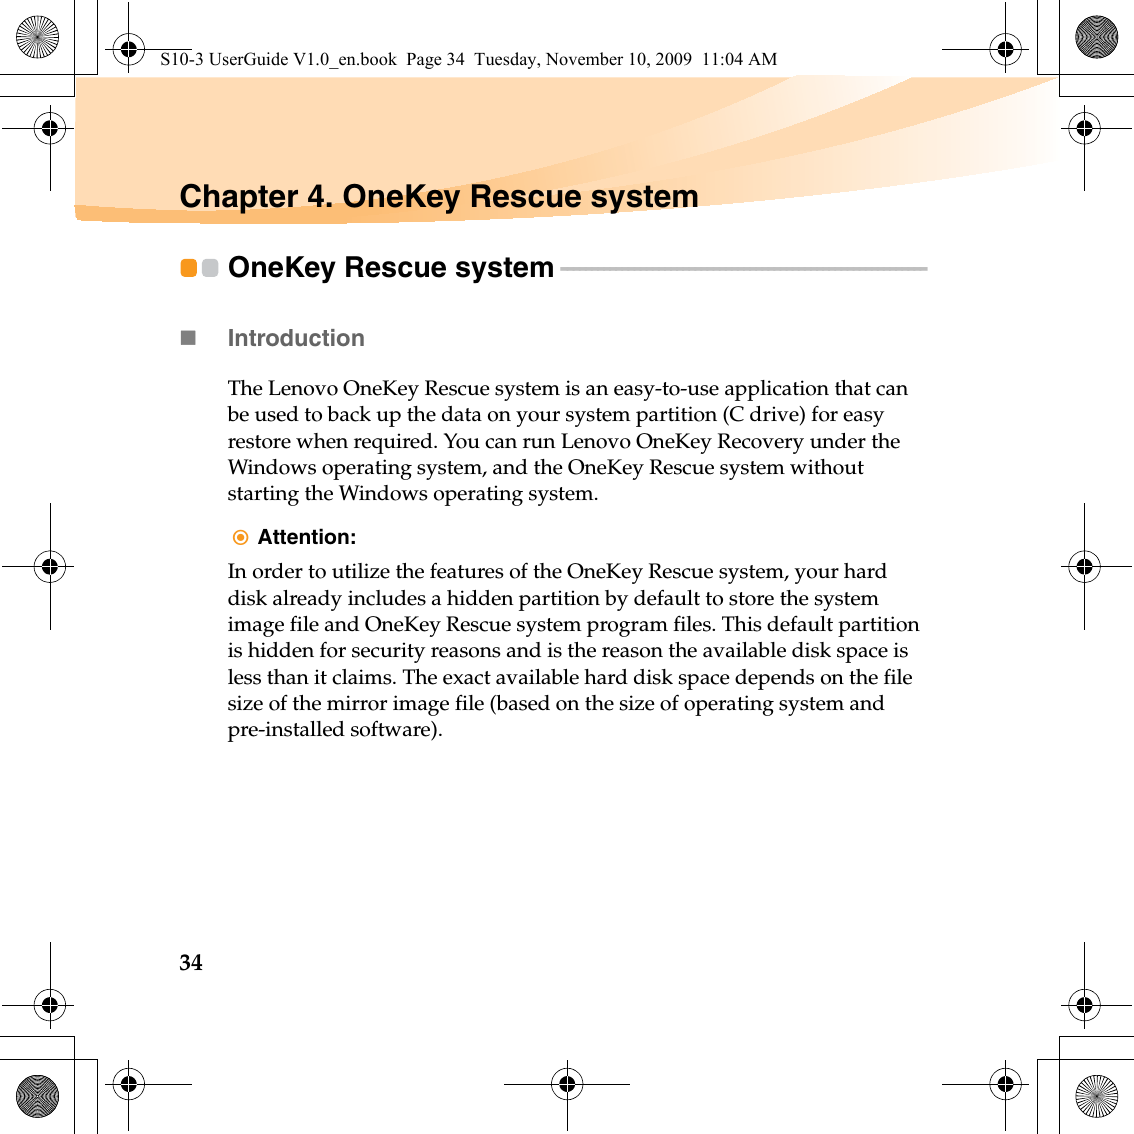 34Chapter 4. OneKey Rescue systemOneKey Rescue system  - - - - - - - - - - - - - - - - - - - - - - - - - - - - - - - - - - - - - - - - - - - - - - - - - - - - - - - - - - - - Introduction The Lenovo OneKey Rescue system is an easy-to-use application that can be used to back up the data on your system partition (C drive) for easy restore when required. You can run Lenovo OneKey Recovery under the Windows operating system, and the OneKey Rescue system without starting the Windows operating system.Attention: In order to utilize the features of the OneKey Rescue system, your hard disk already includes a hidden partition by default to store the system image file and OneKey Rescue system program files. This default partition is hidden for security reasons and is the reason the available disk space is less than it claims. The exact available hard disk space depends on the file size of the mirror image file (based on the size of operating system and pre-installed software).S10-3 UserGuide V1.0_en.book  Page 34  Tuesday, November 10, 2009  11:04 AM